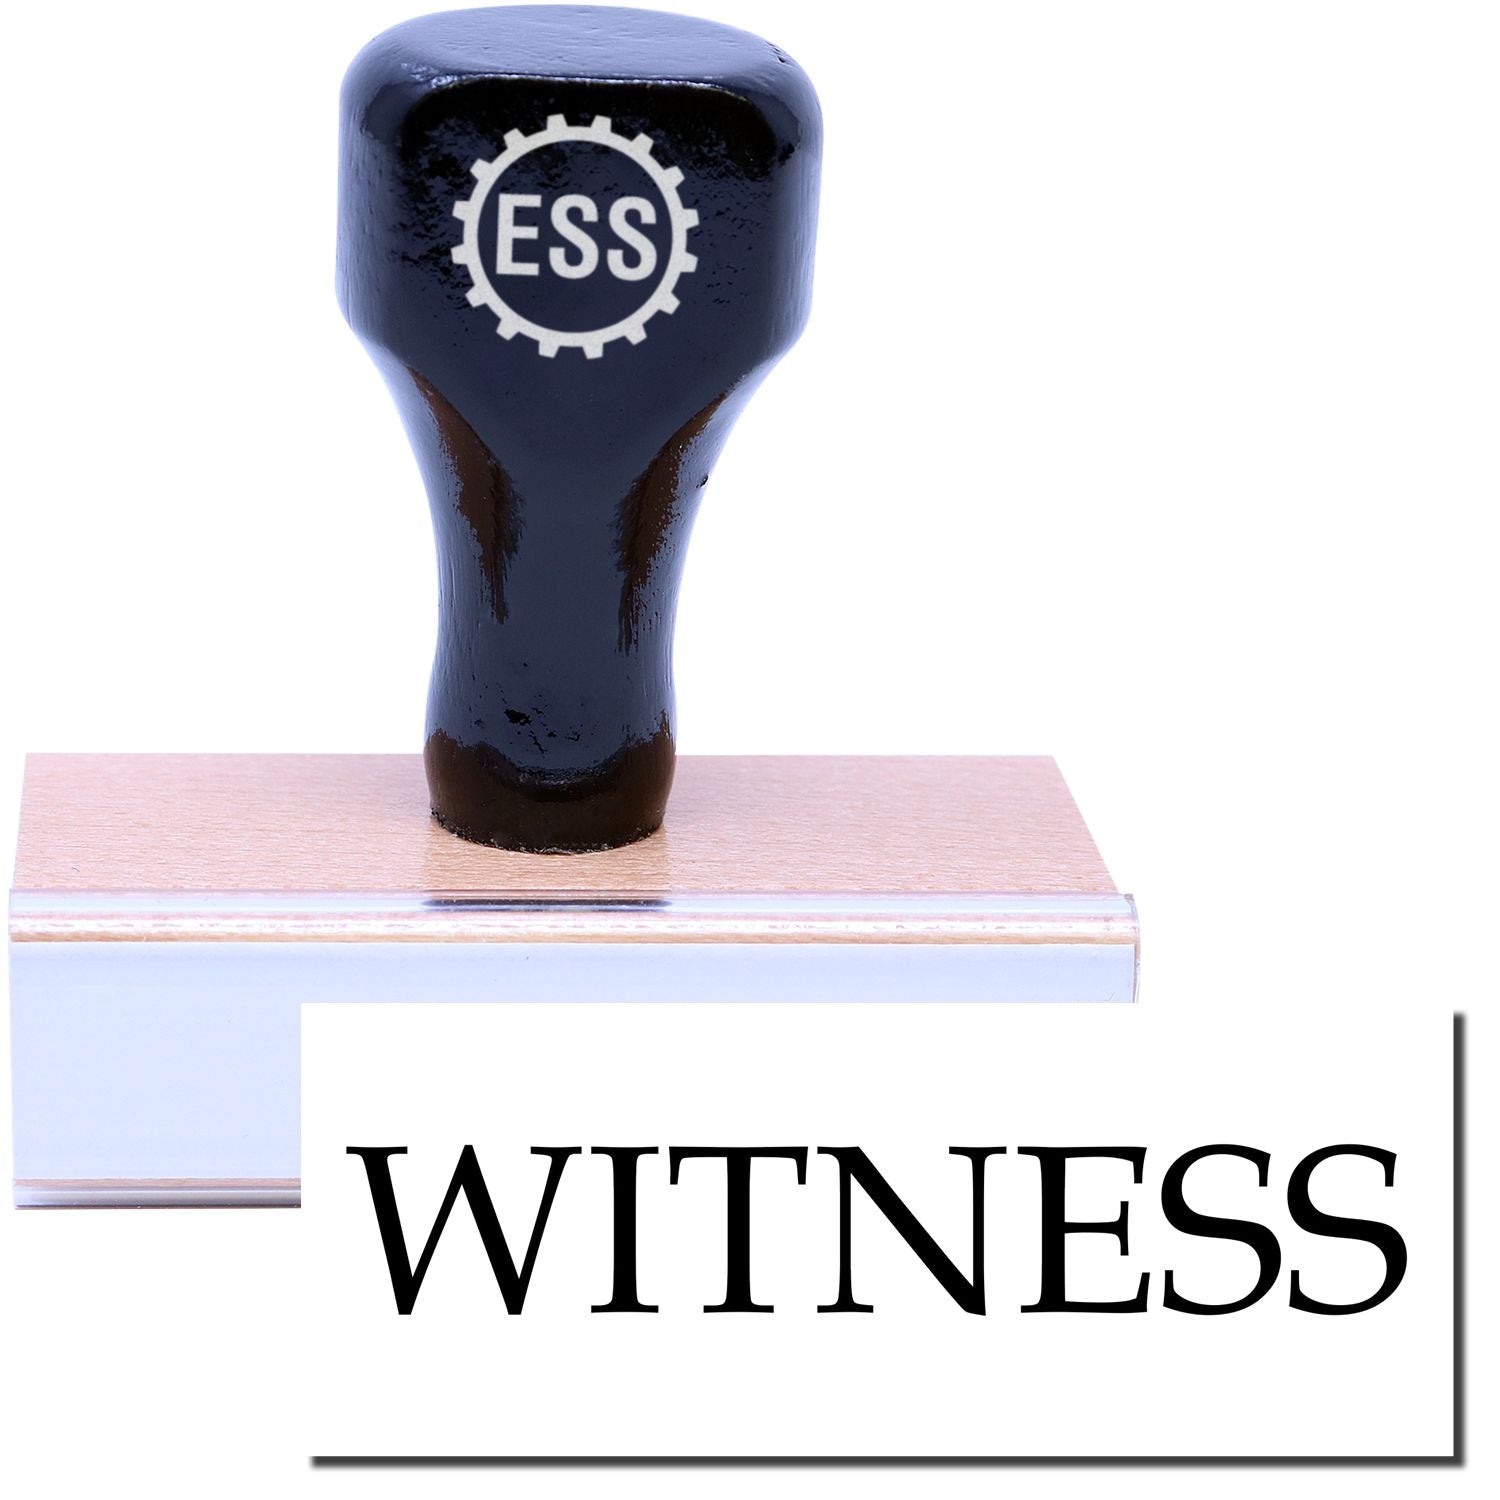 A stock office legal rubber stamp with a stamped image showing how the text "WITNESS" is displayed after stamping.